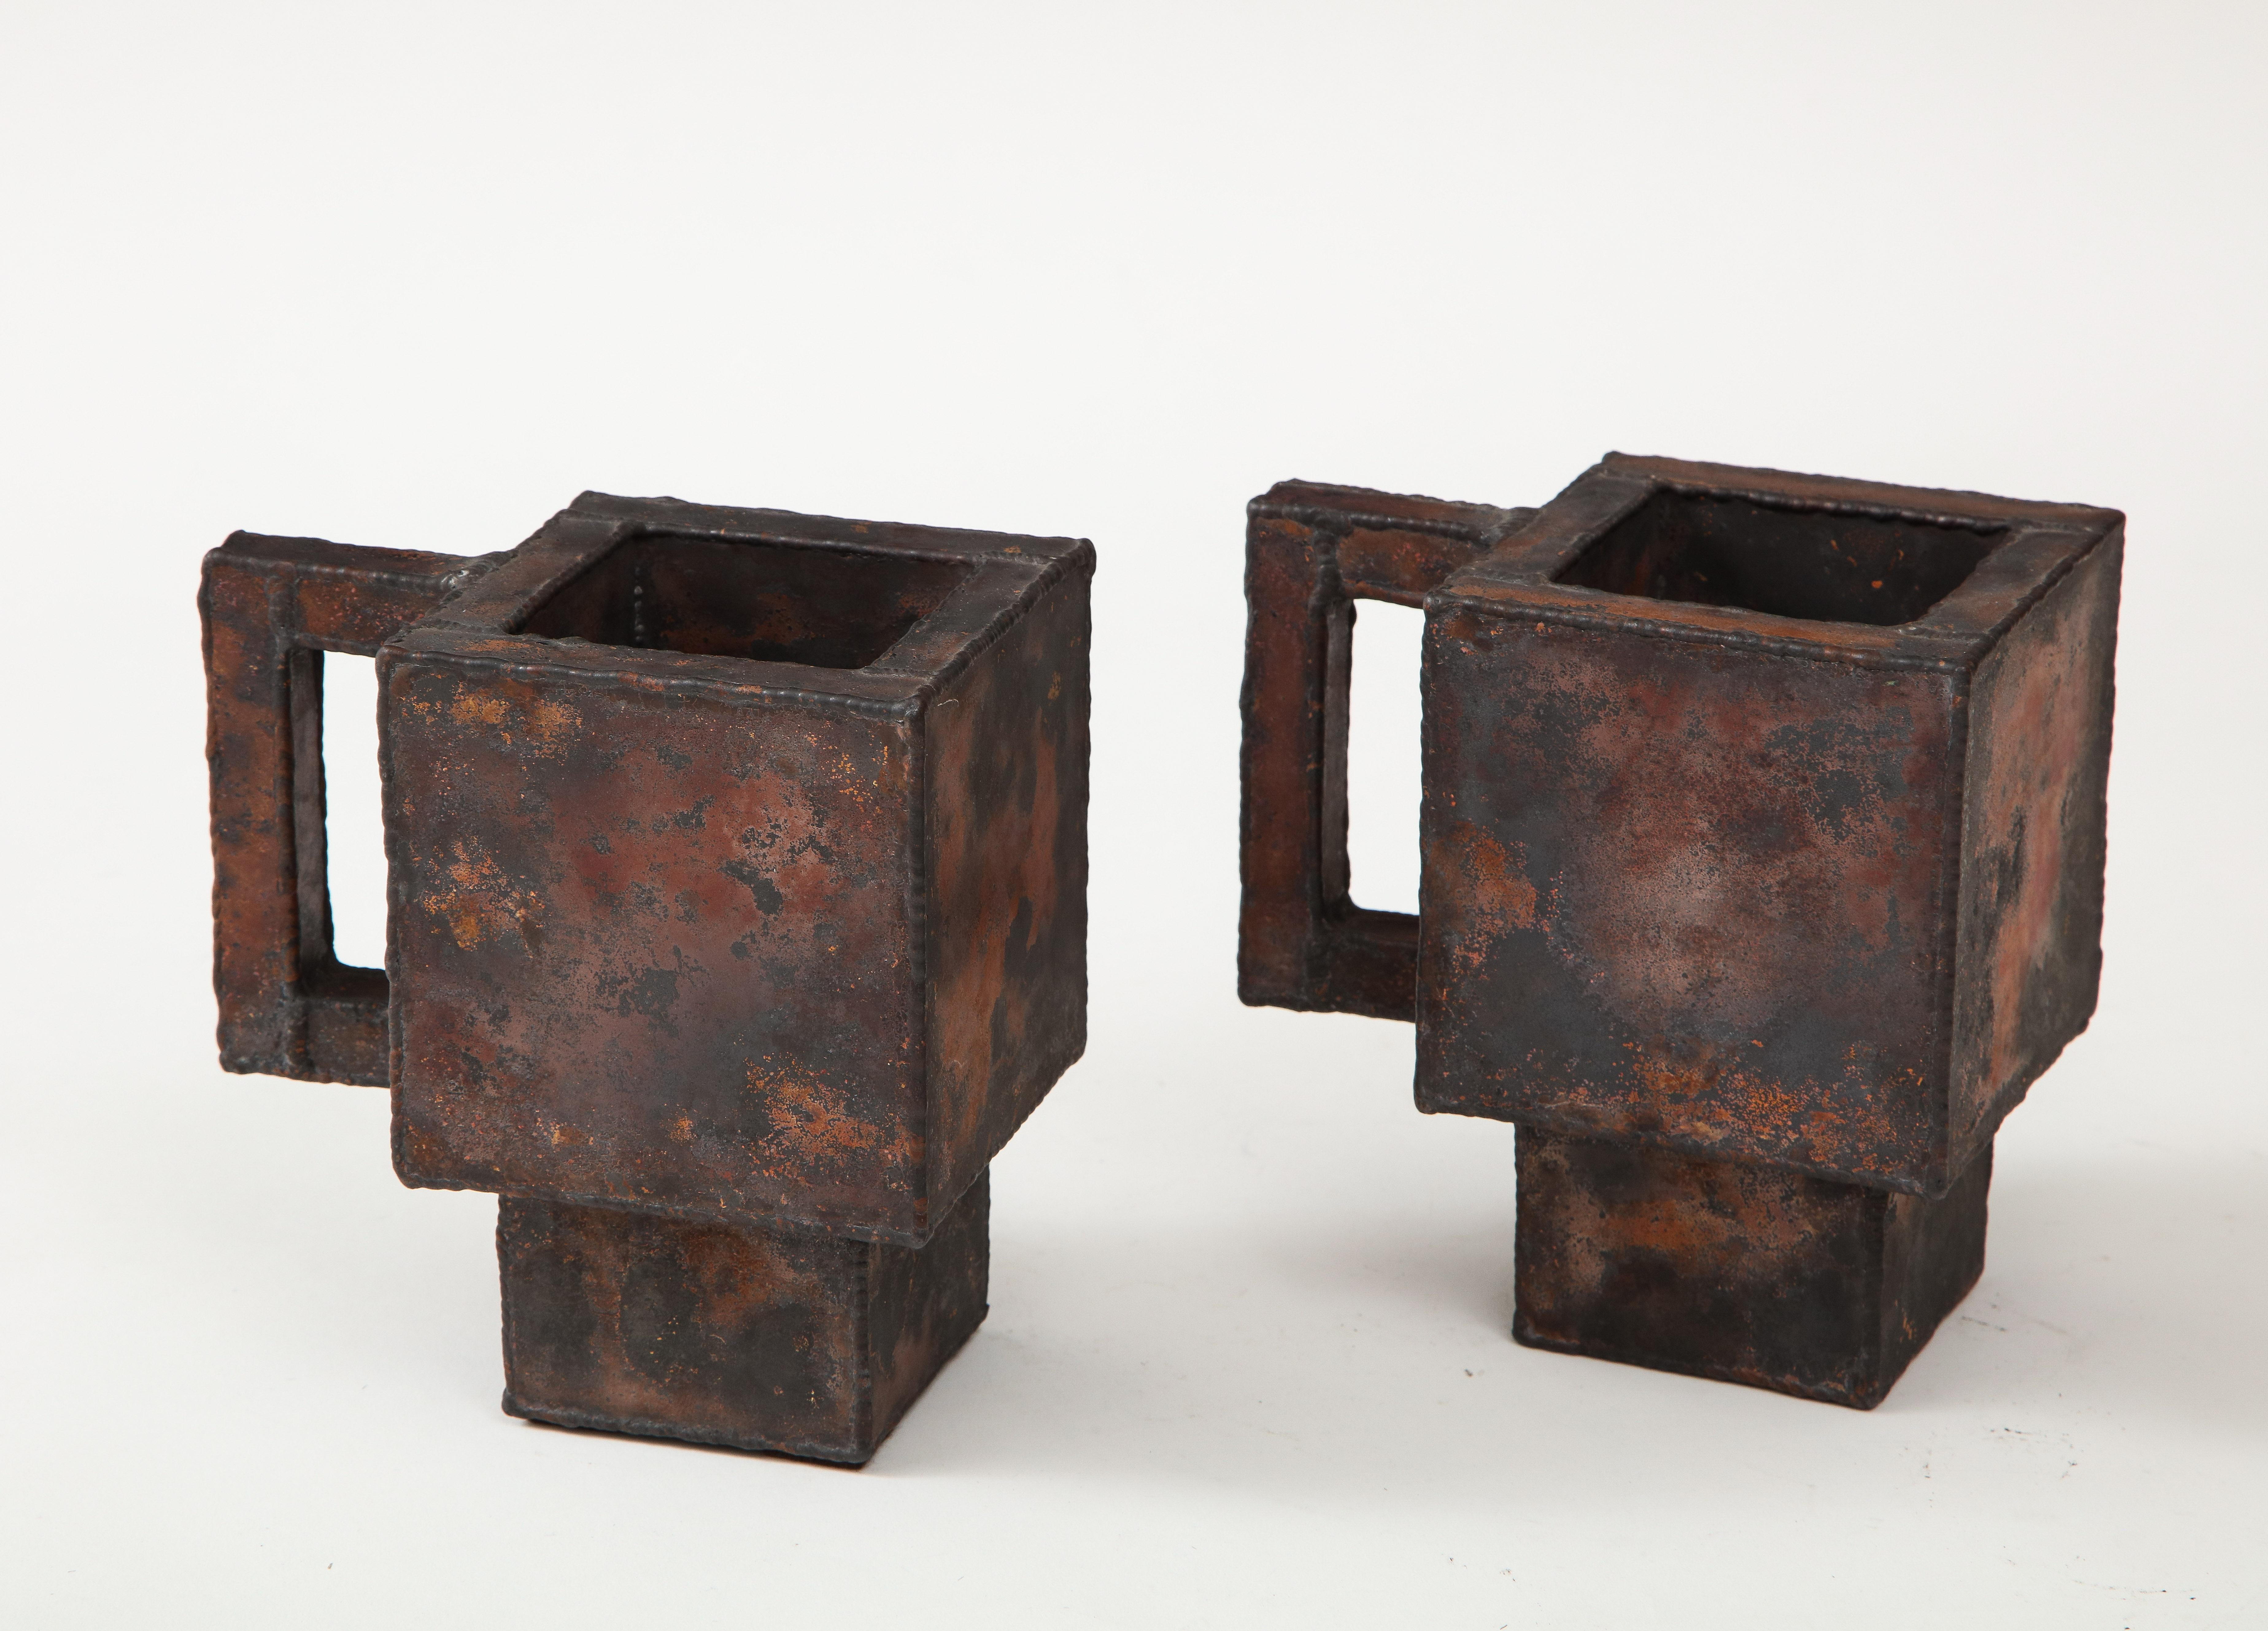 Contemporary Pair of Red & Green Enameled Copper Mugs by Kwangho Lee, c. 2012 For Sale